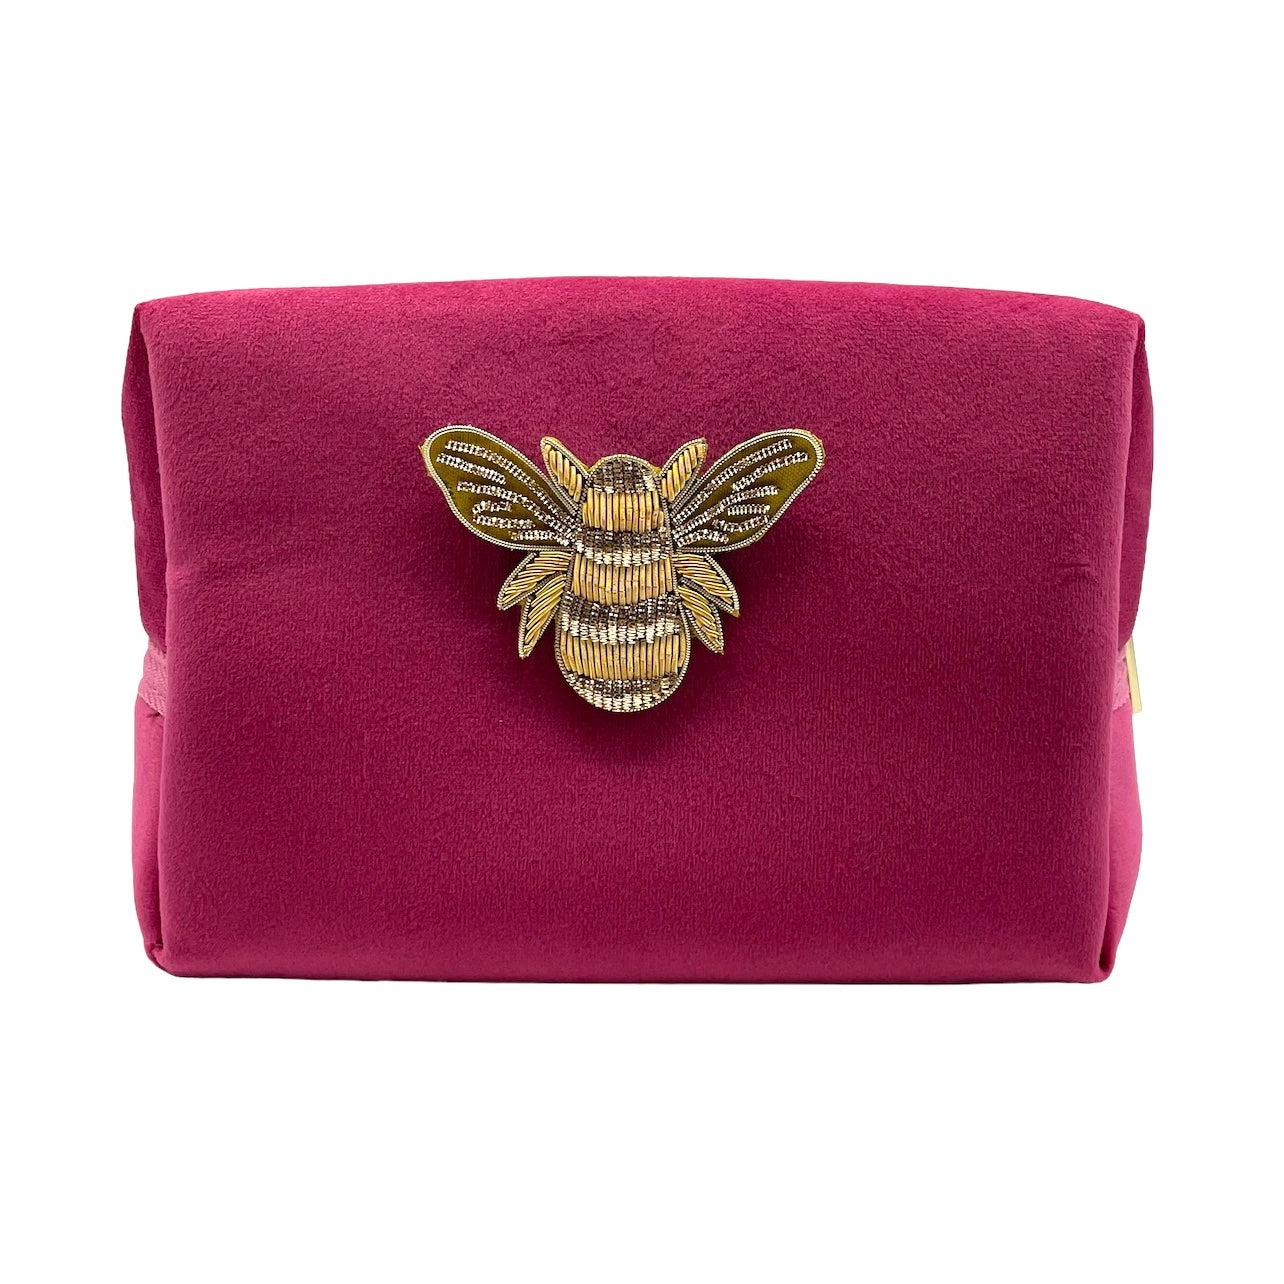 Bright pink make-up bag and a gold bee pin - recycled velvet